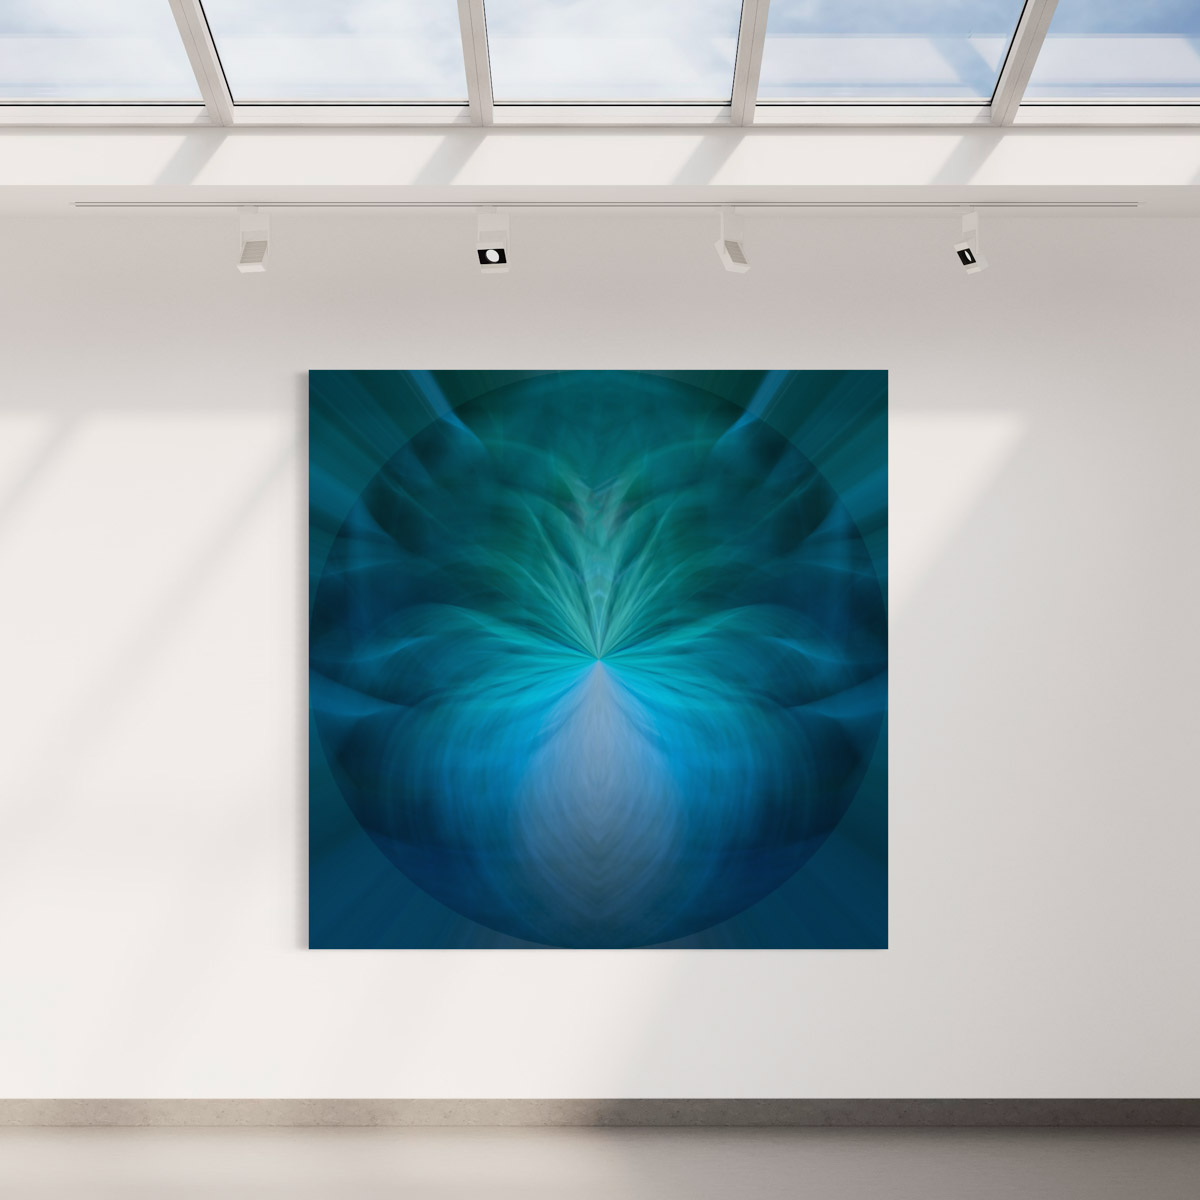 A large painting of a blue flower in the middle.